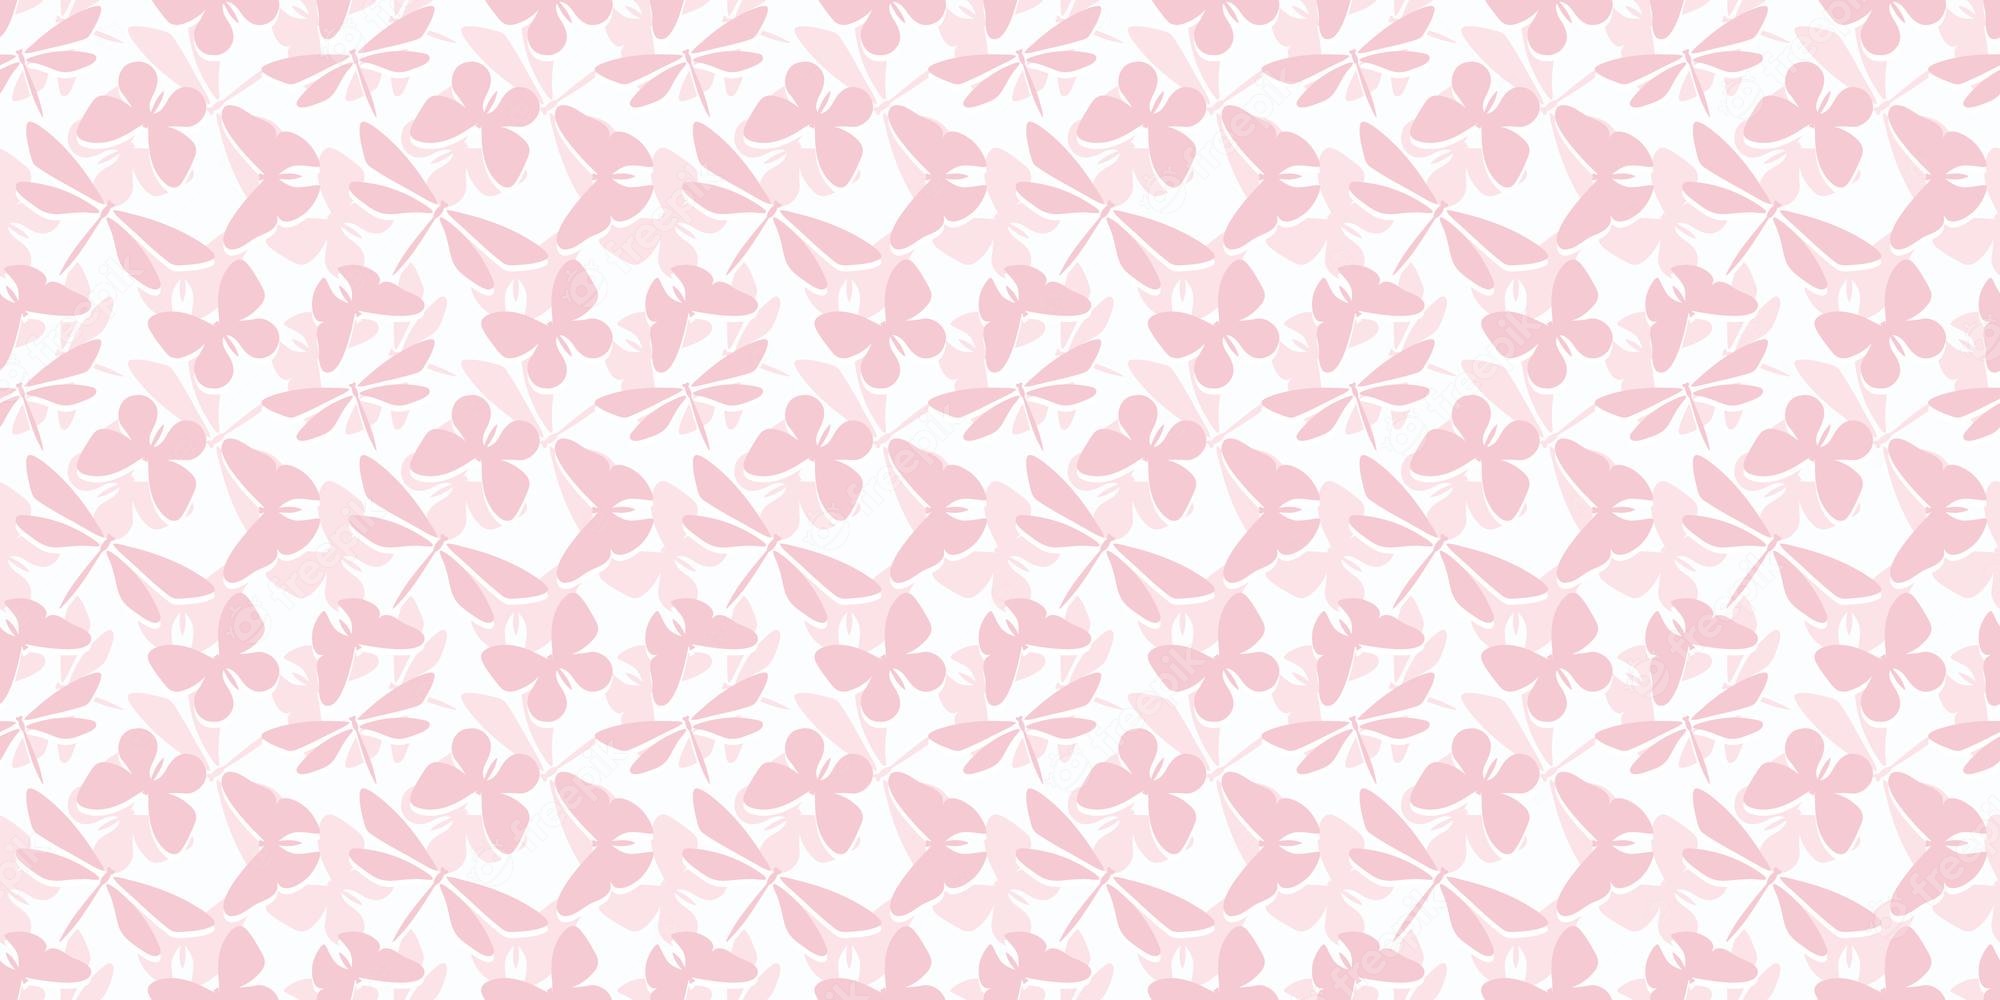 Premium Vector. Pink butterfly and dragonfly seamless pattern background